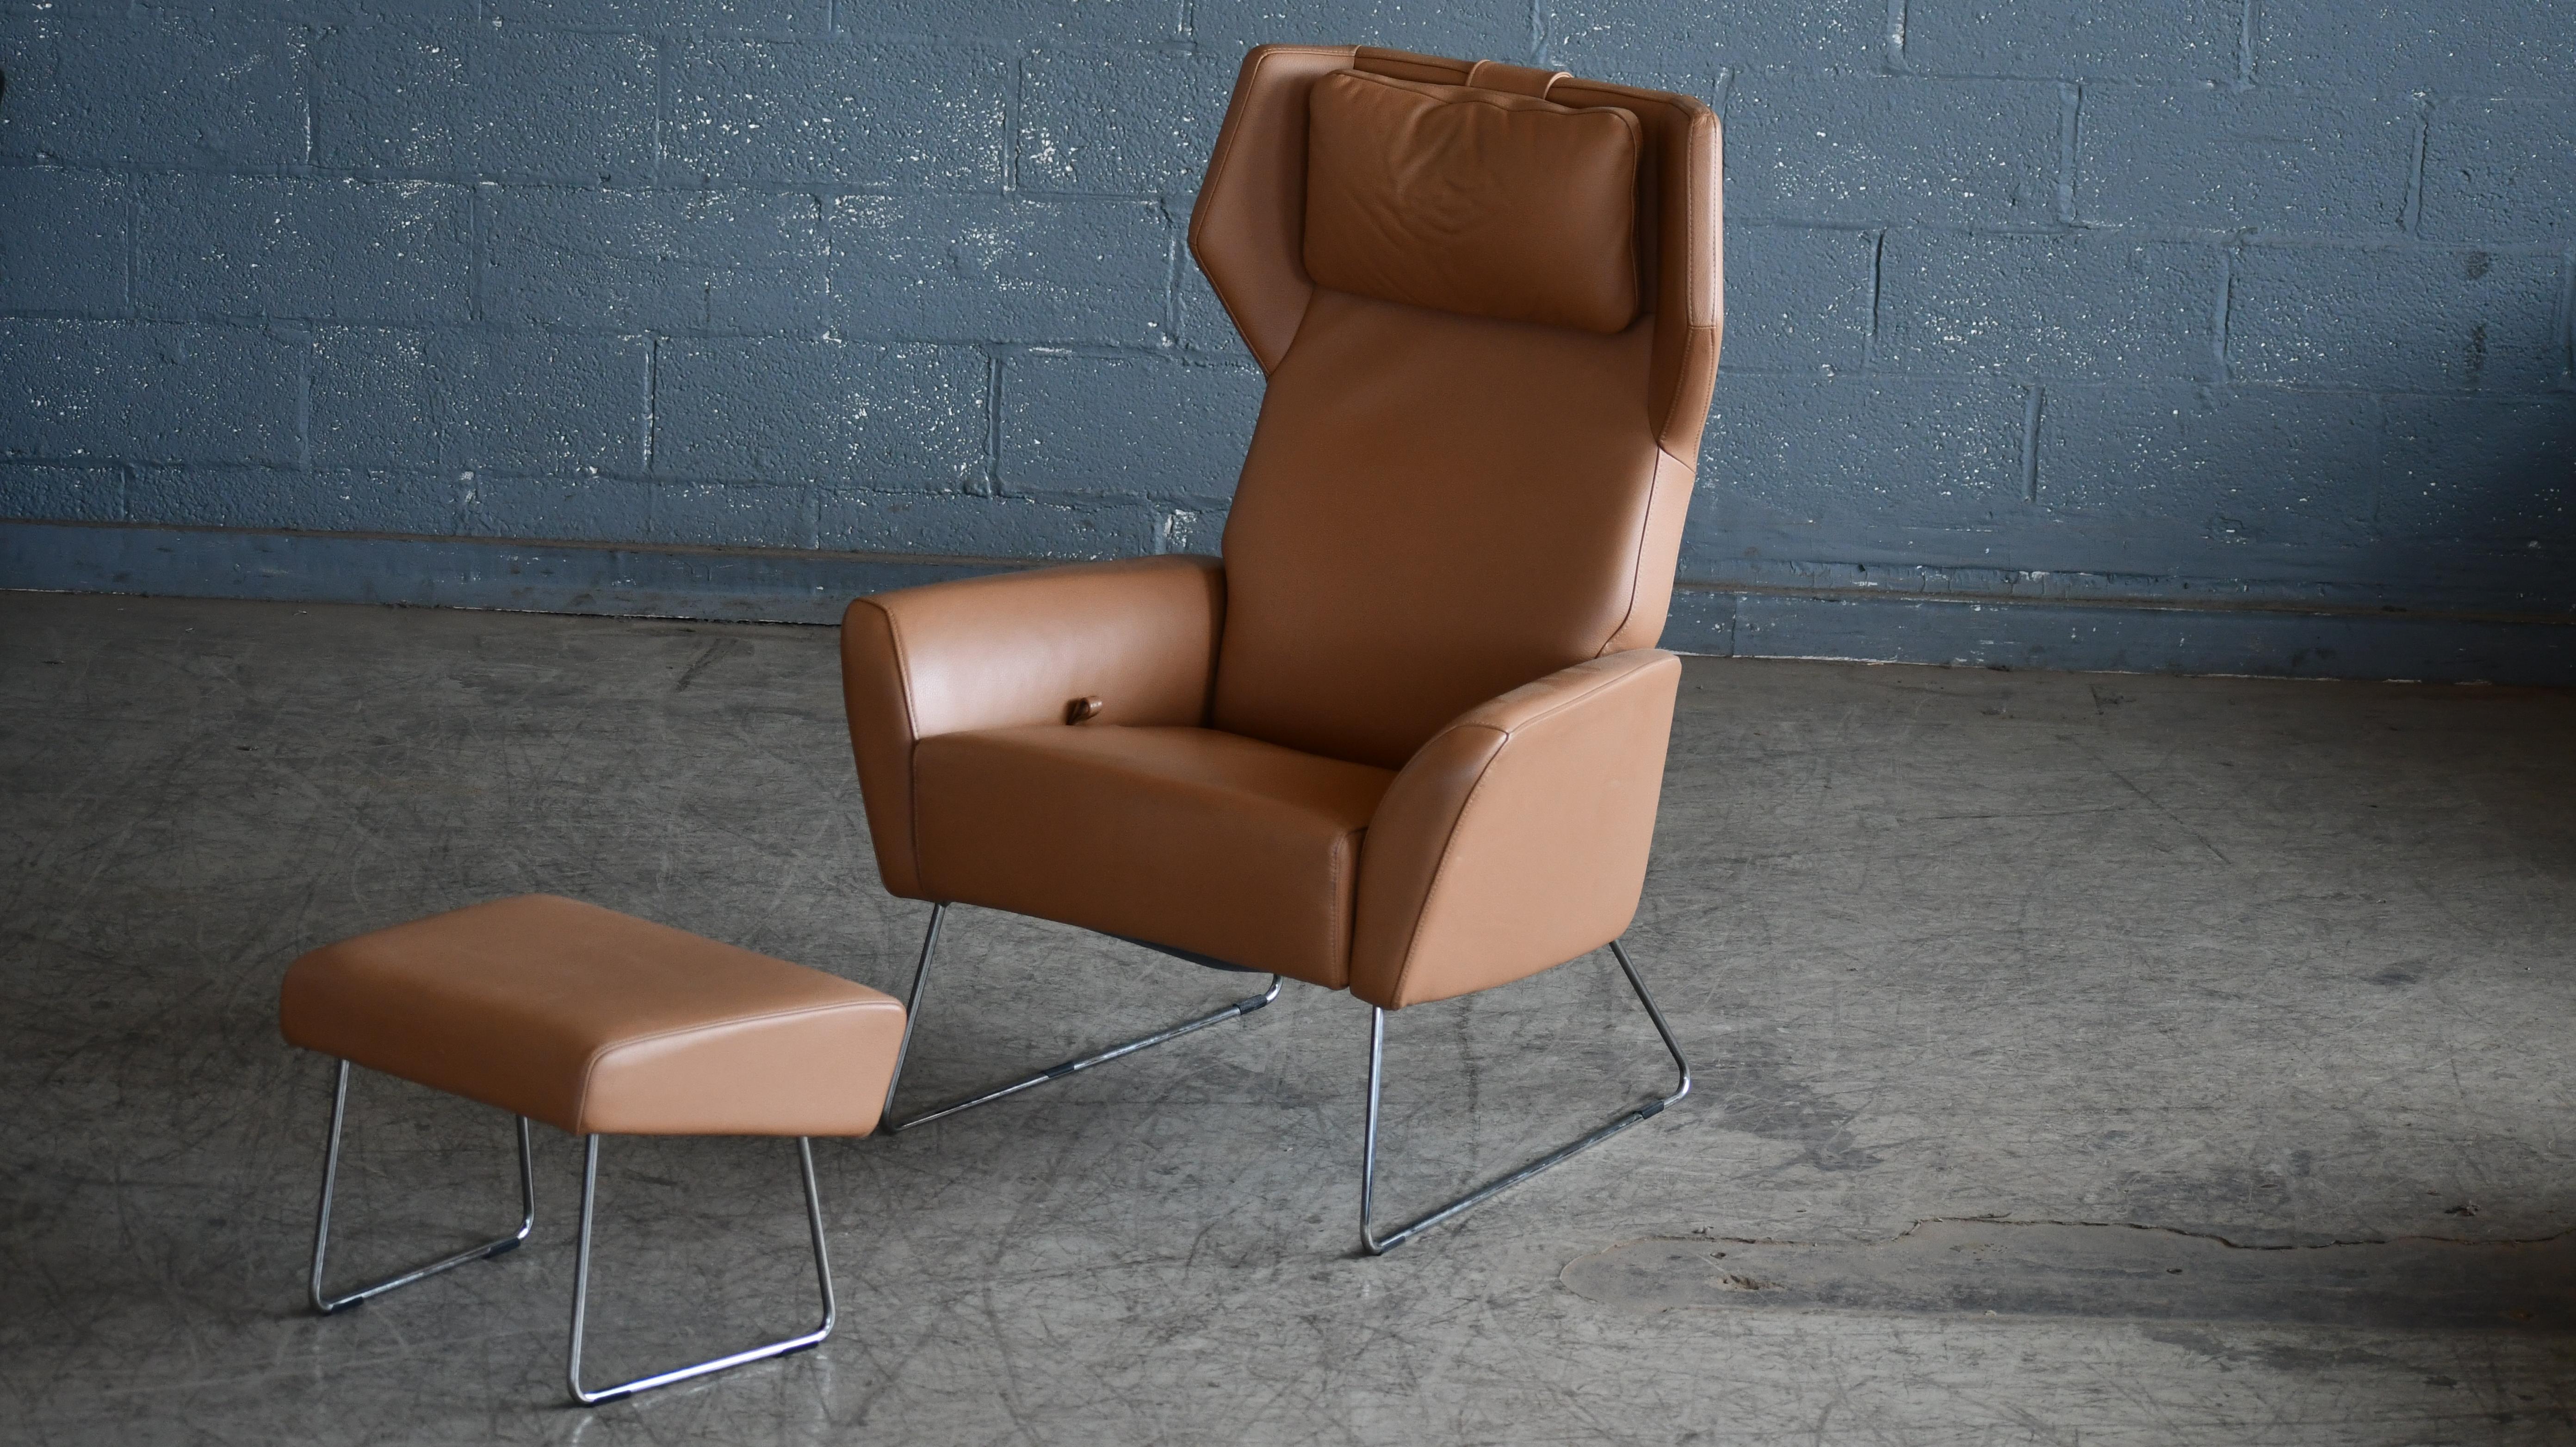 Beautiful highback lounge chair with ottoman designed by Roger Person for Swedese in 2005. Soft aniline leather. Pulmaflex suspension (piston based  suspension system) that allows the backrest to recline and chair filled with cold foam and fiberfill